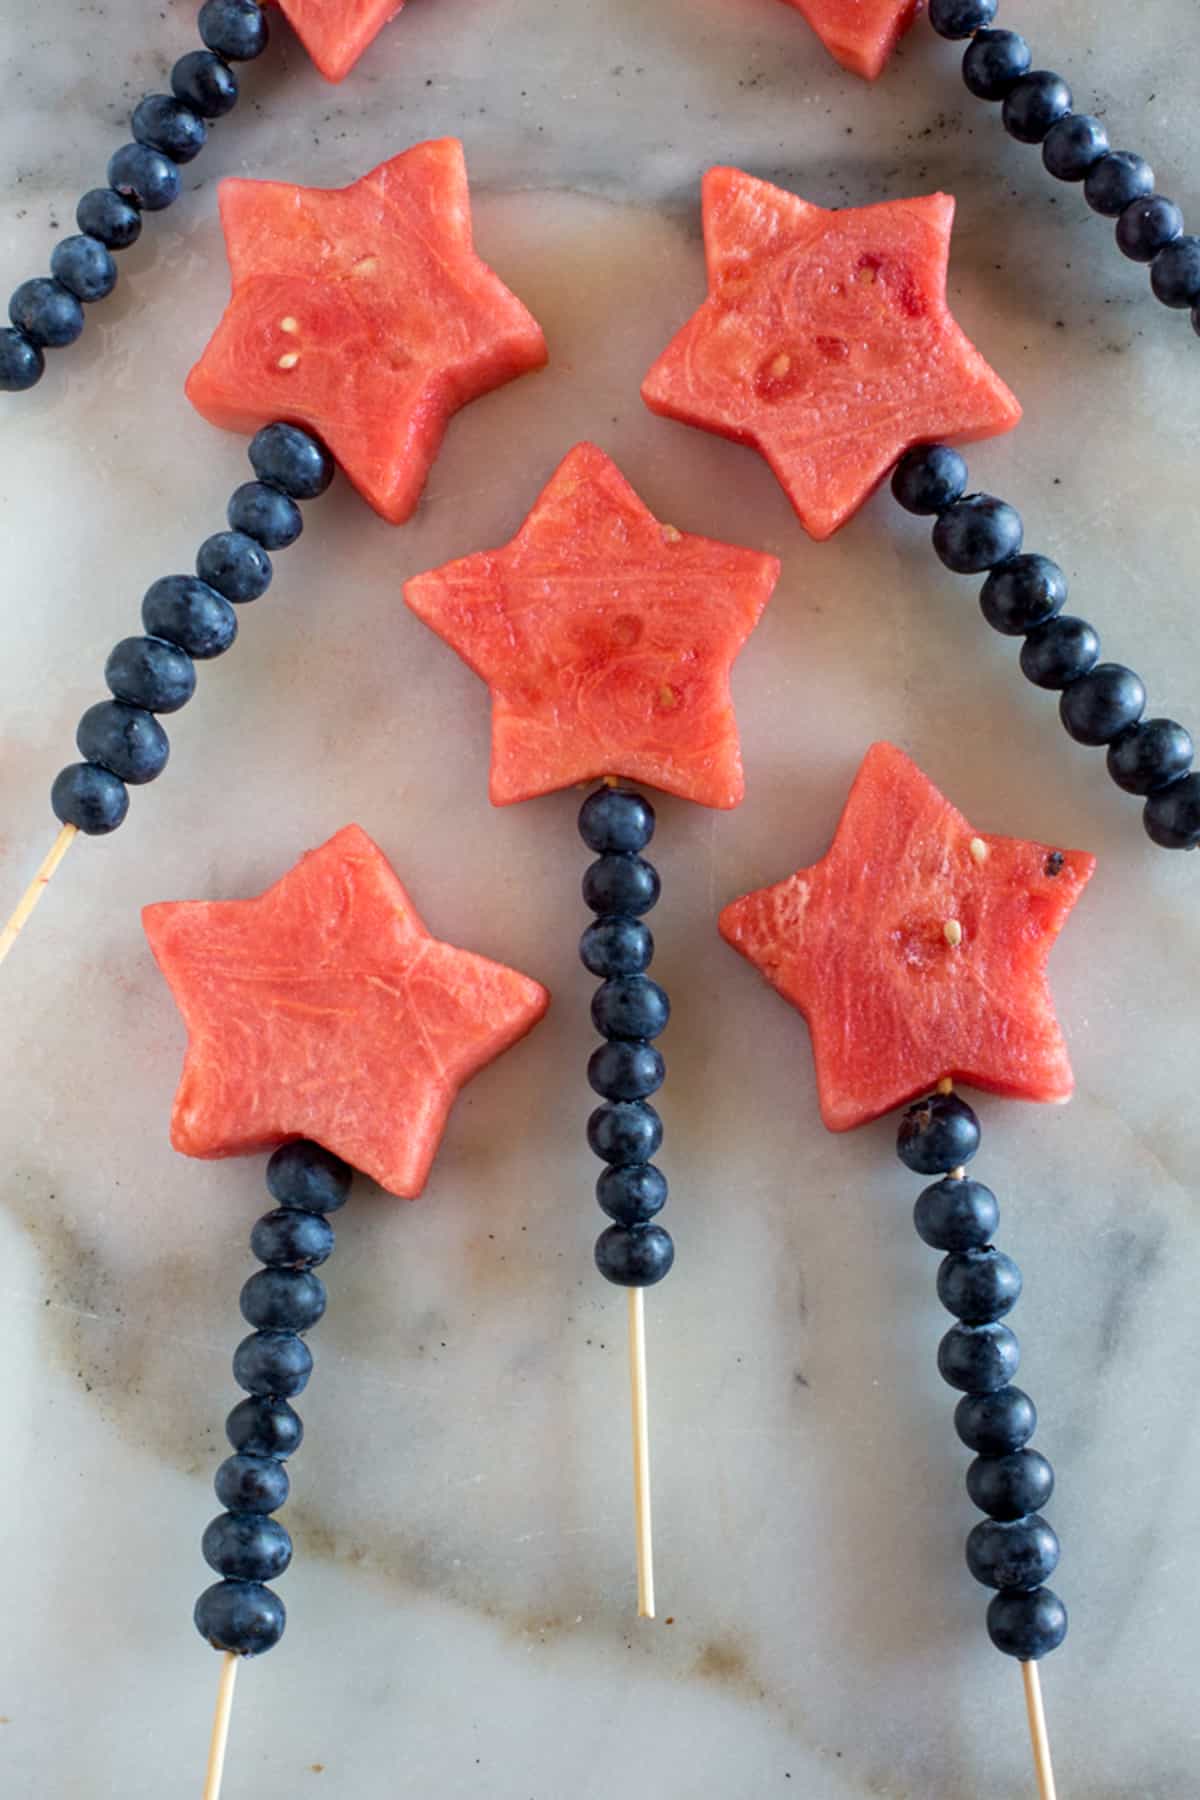 A bunch of Fruit Sparklers on a countertop made with blueberries and a piece of watermelon shaped like a star.